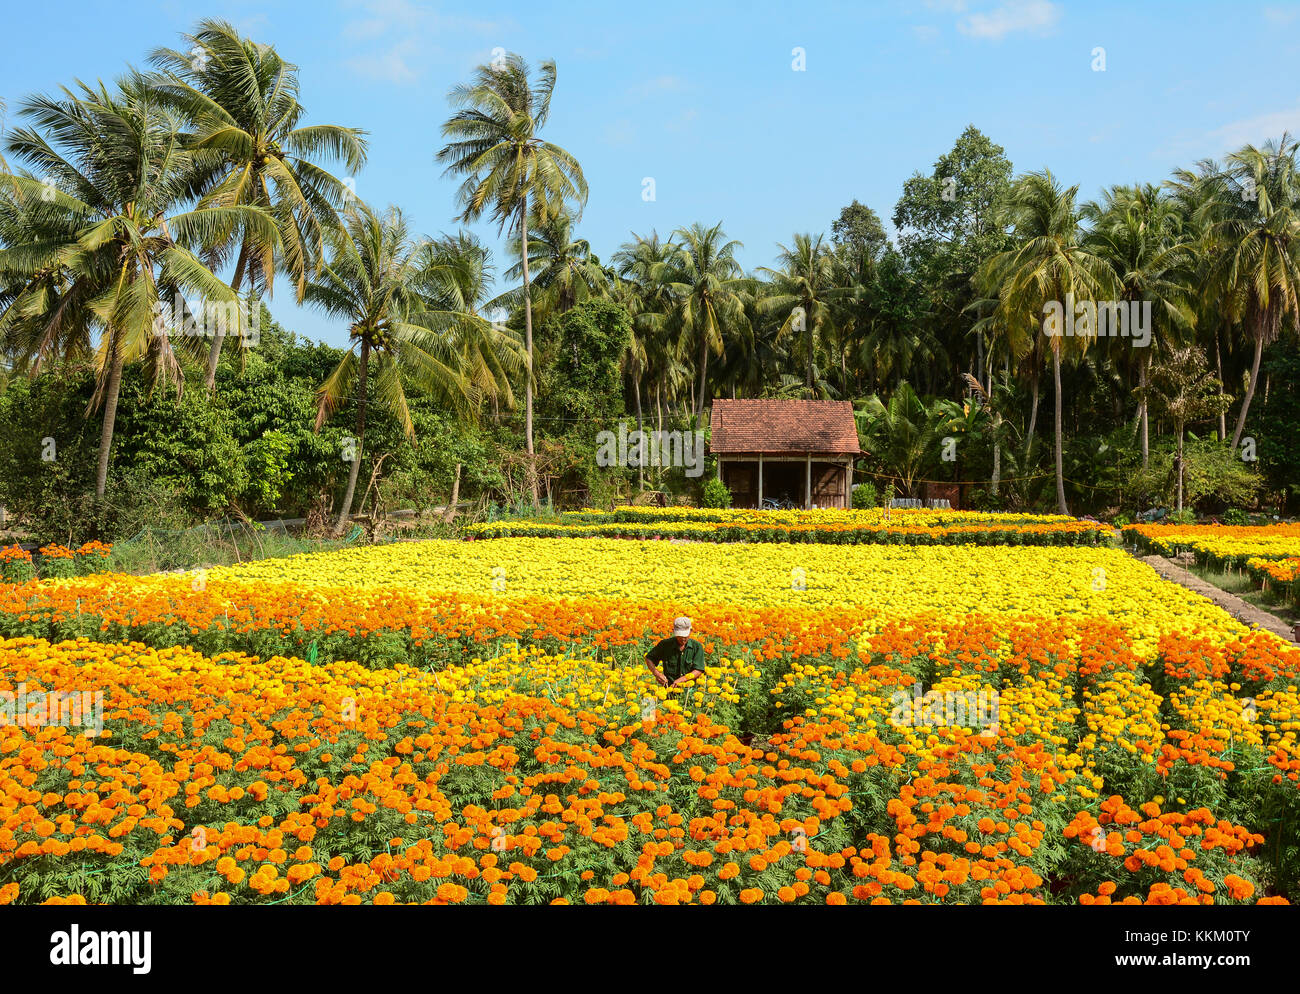 Sa Dec, Vietnam - Jan 31, 2016. A man working at the flower plantation at sunny day in Sa Dec, Vietnam. Sadec District specializes in products from th Stock Photo